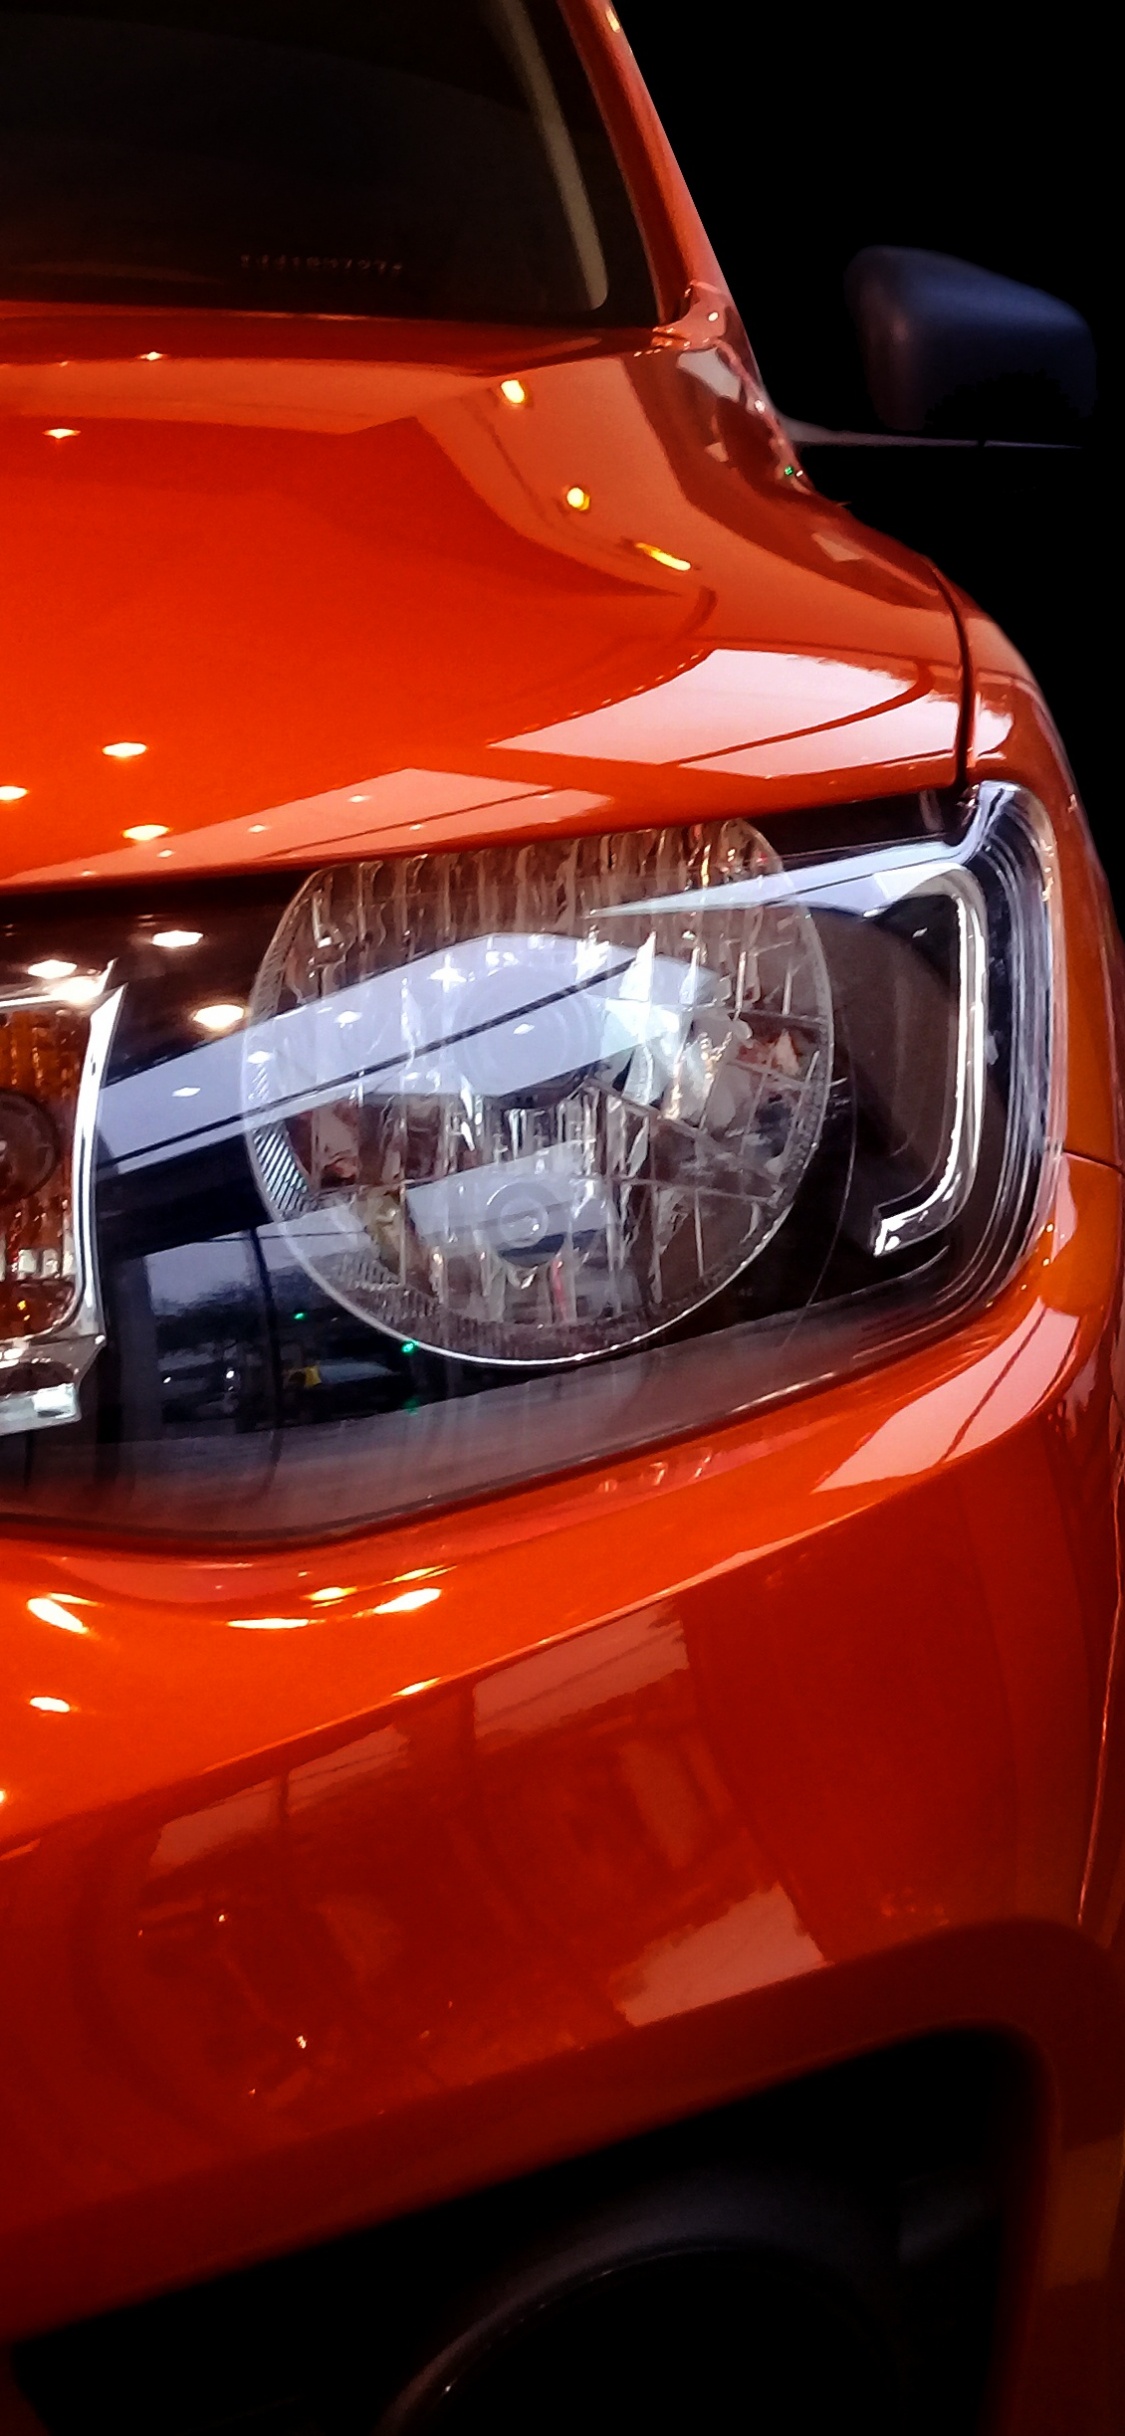 Orange Car With White Lights. Wallpaper in 1125x2436 Resolution